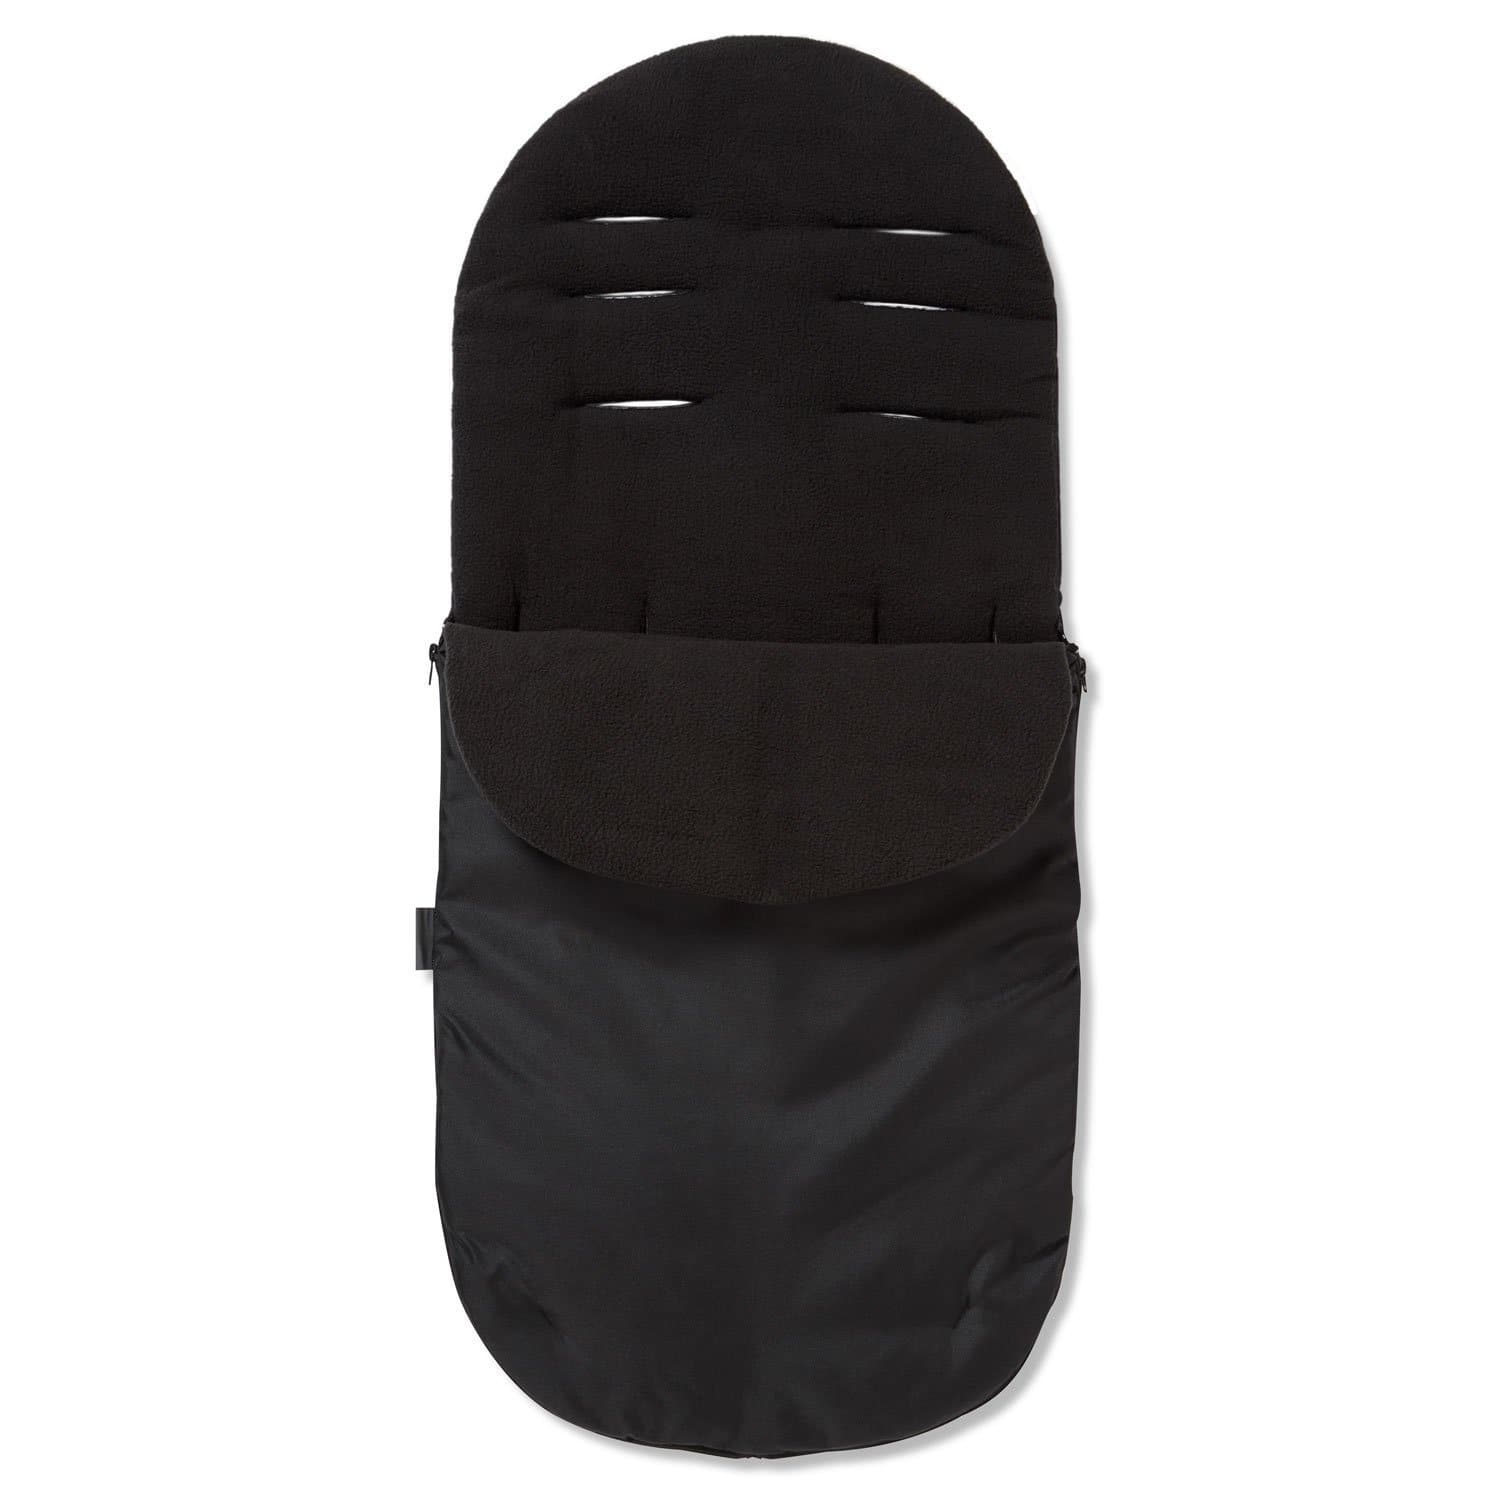 Footmuff / Cosy Toes Compatible with Bumbleride - For Your Little One